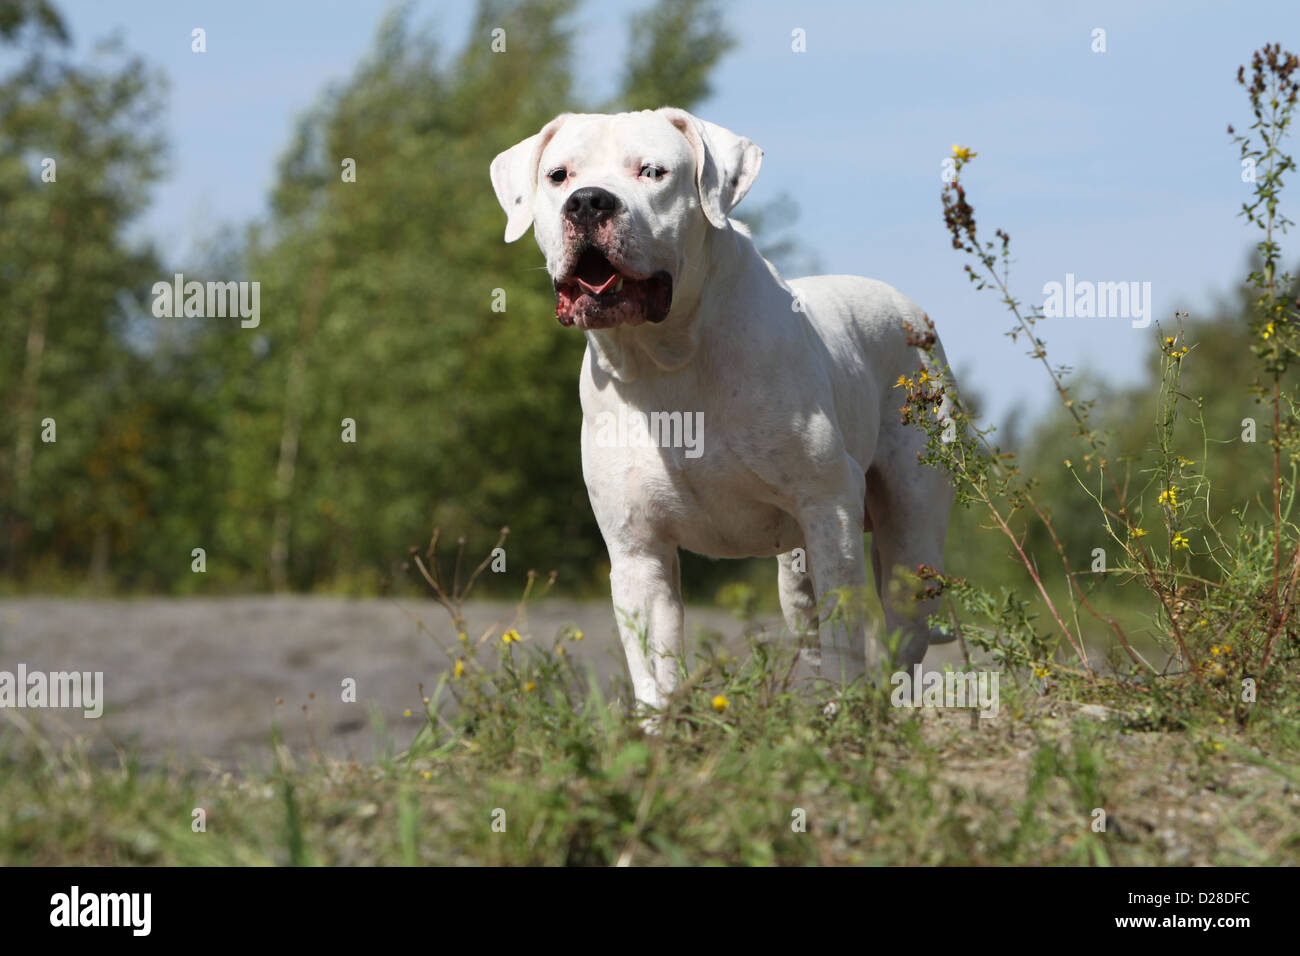 Dog Dogo Argentino / Dogue Argentin (natural ears) adult standing in a meadow Stock Photo